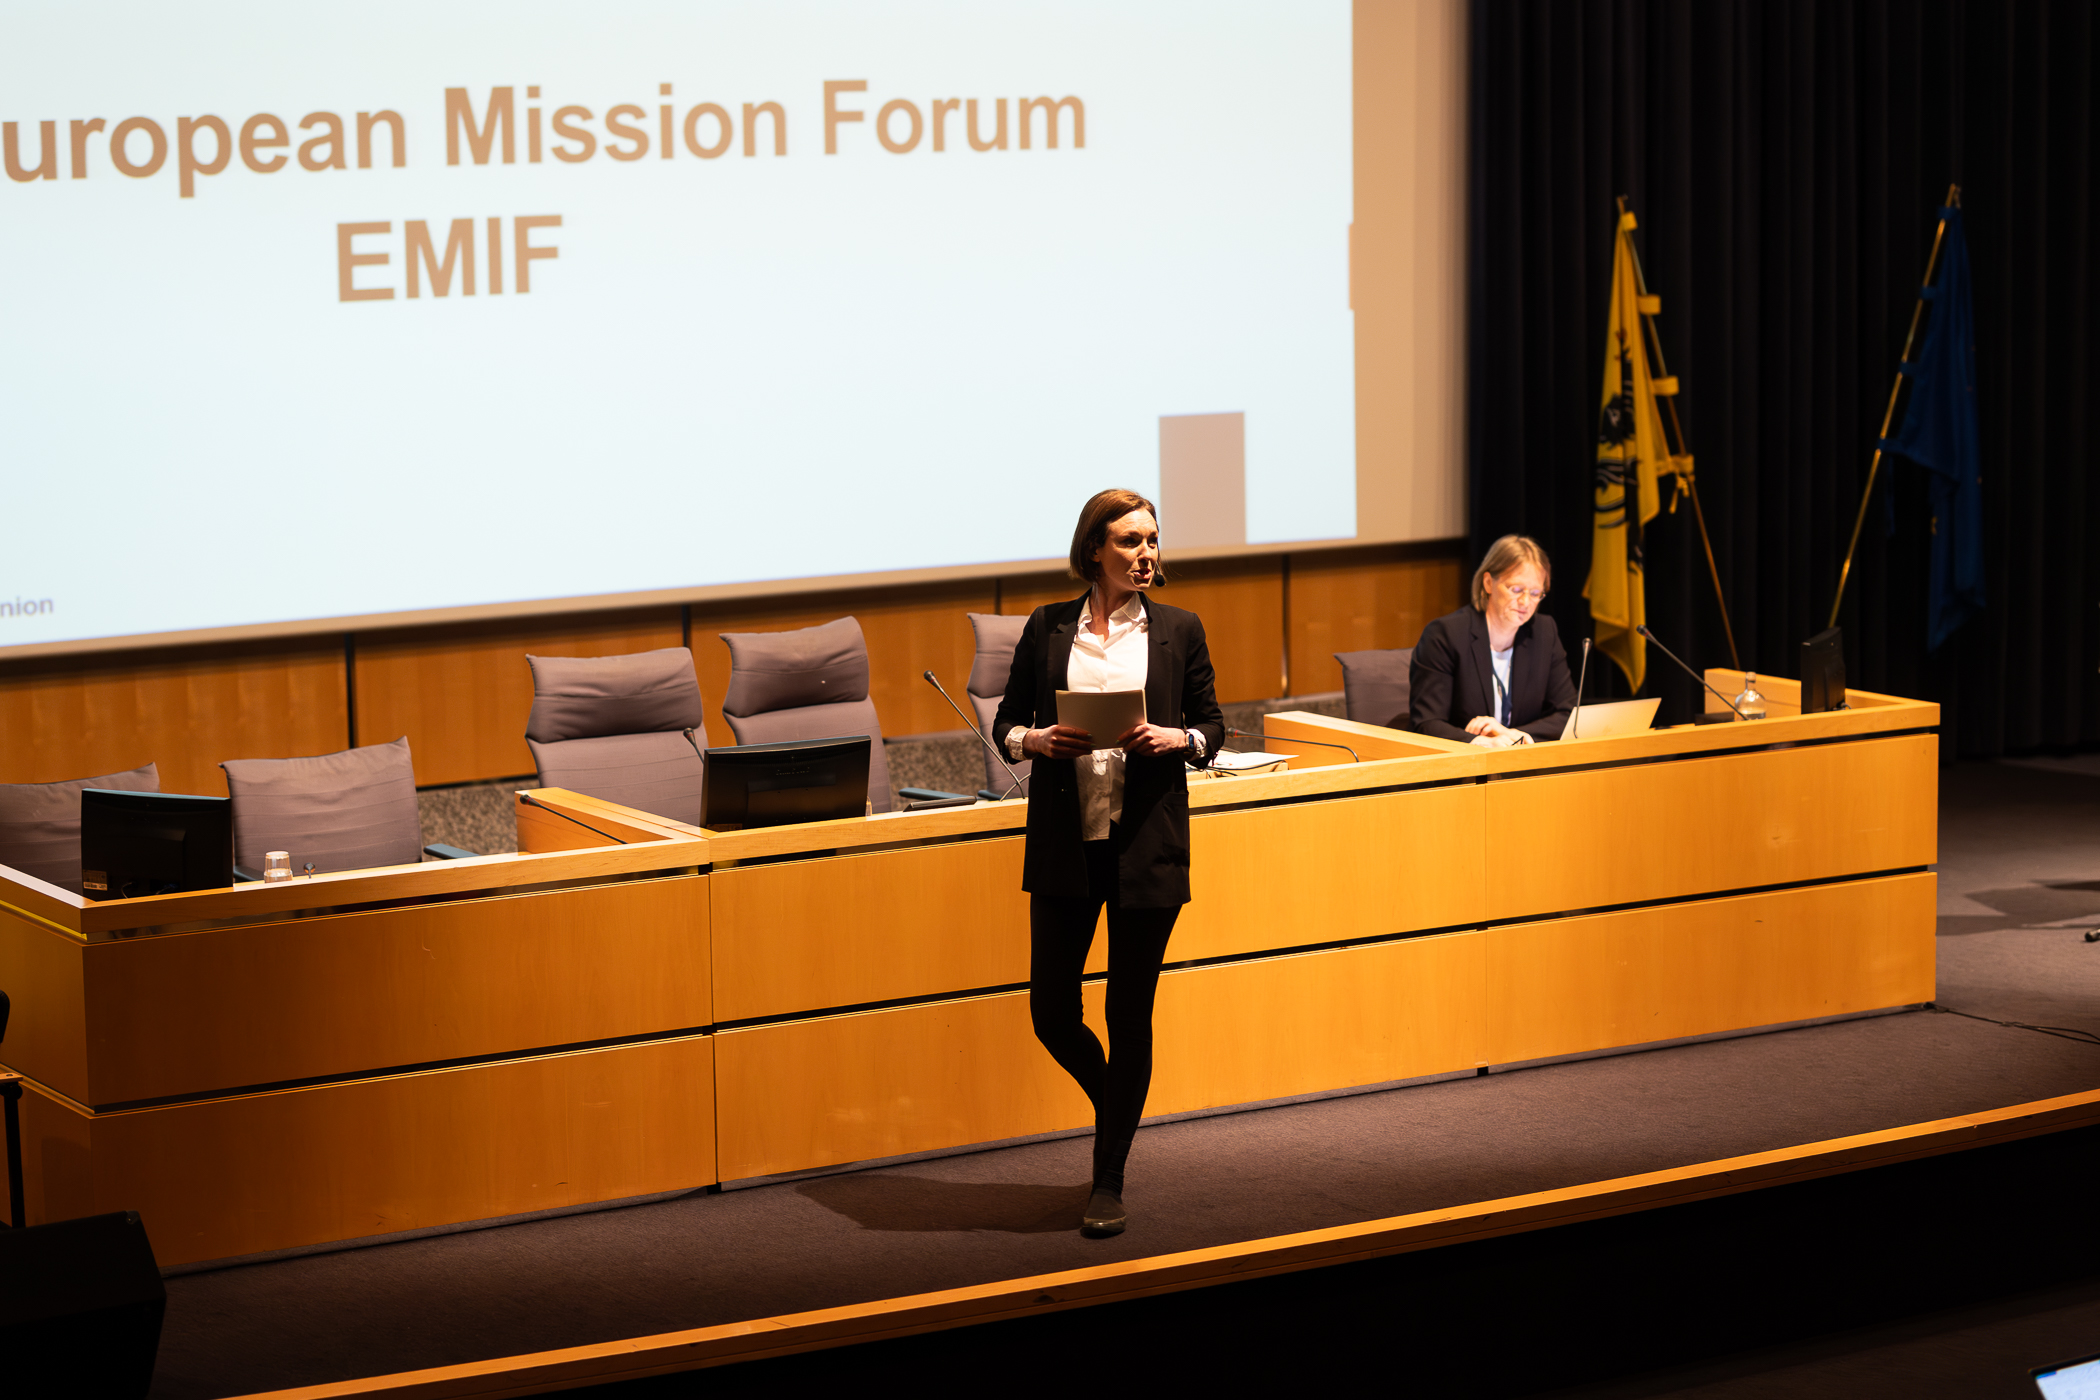 Moderator Maggie Childs welcomes to EMIF event